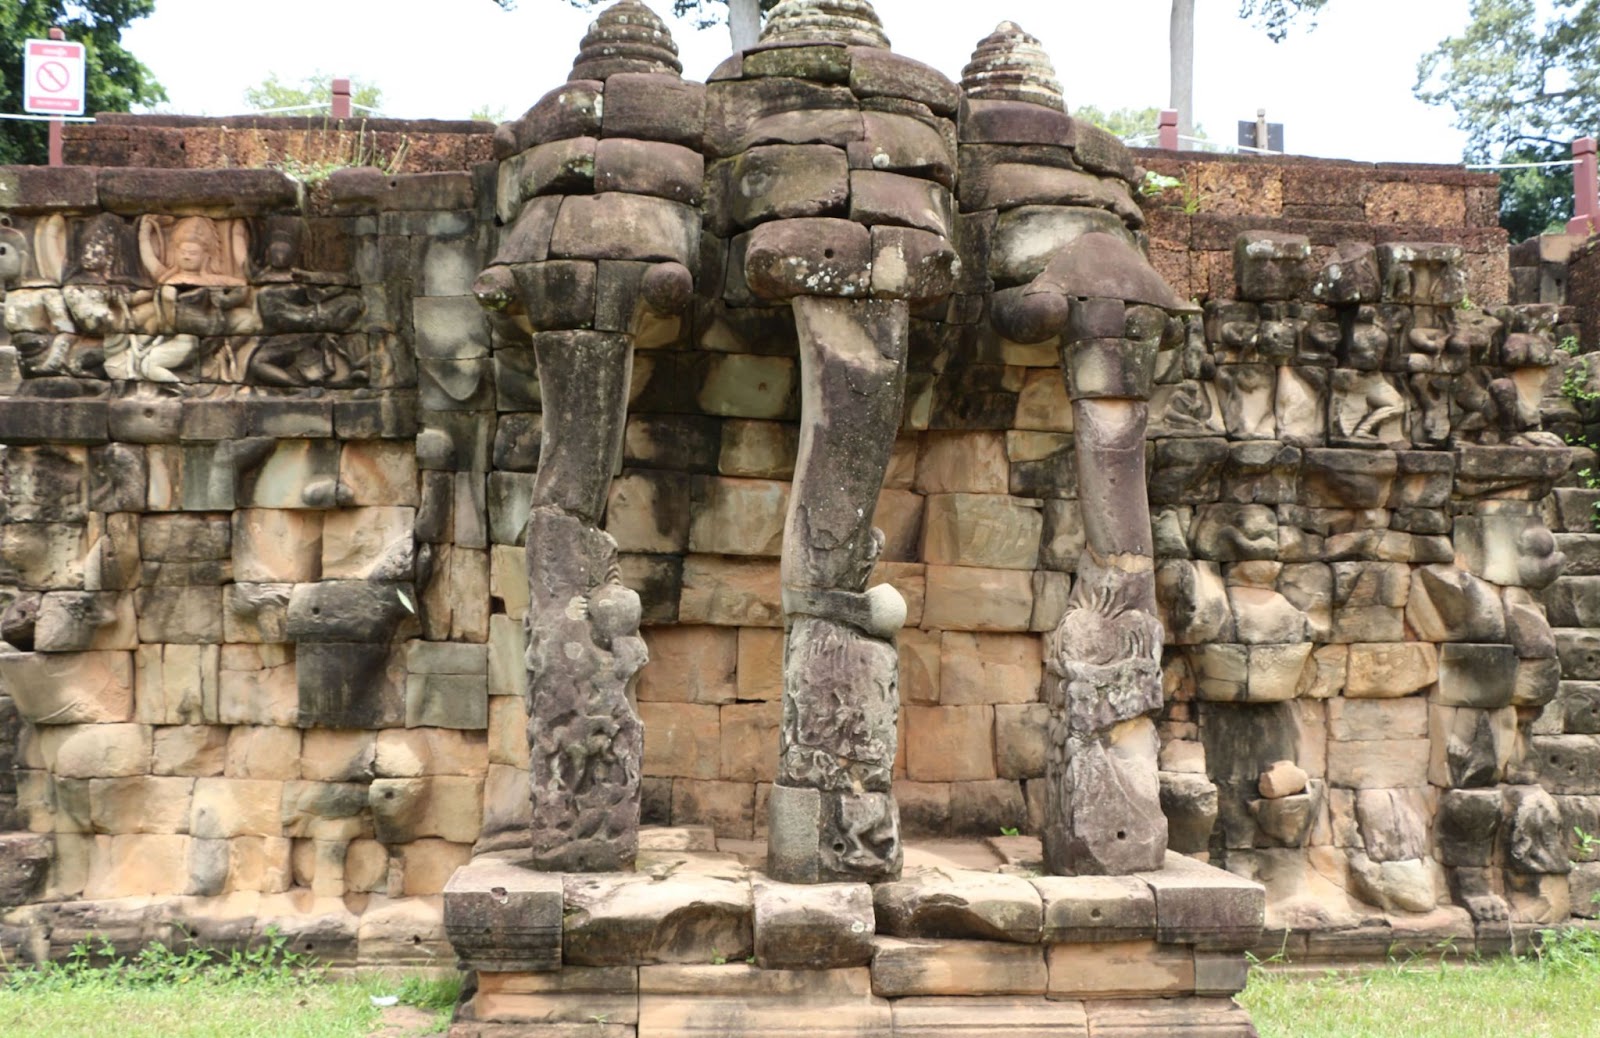 3 days in Siem Reap. This is the Terrace of the Elephants which was originally built as a viewing platform for the king.